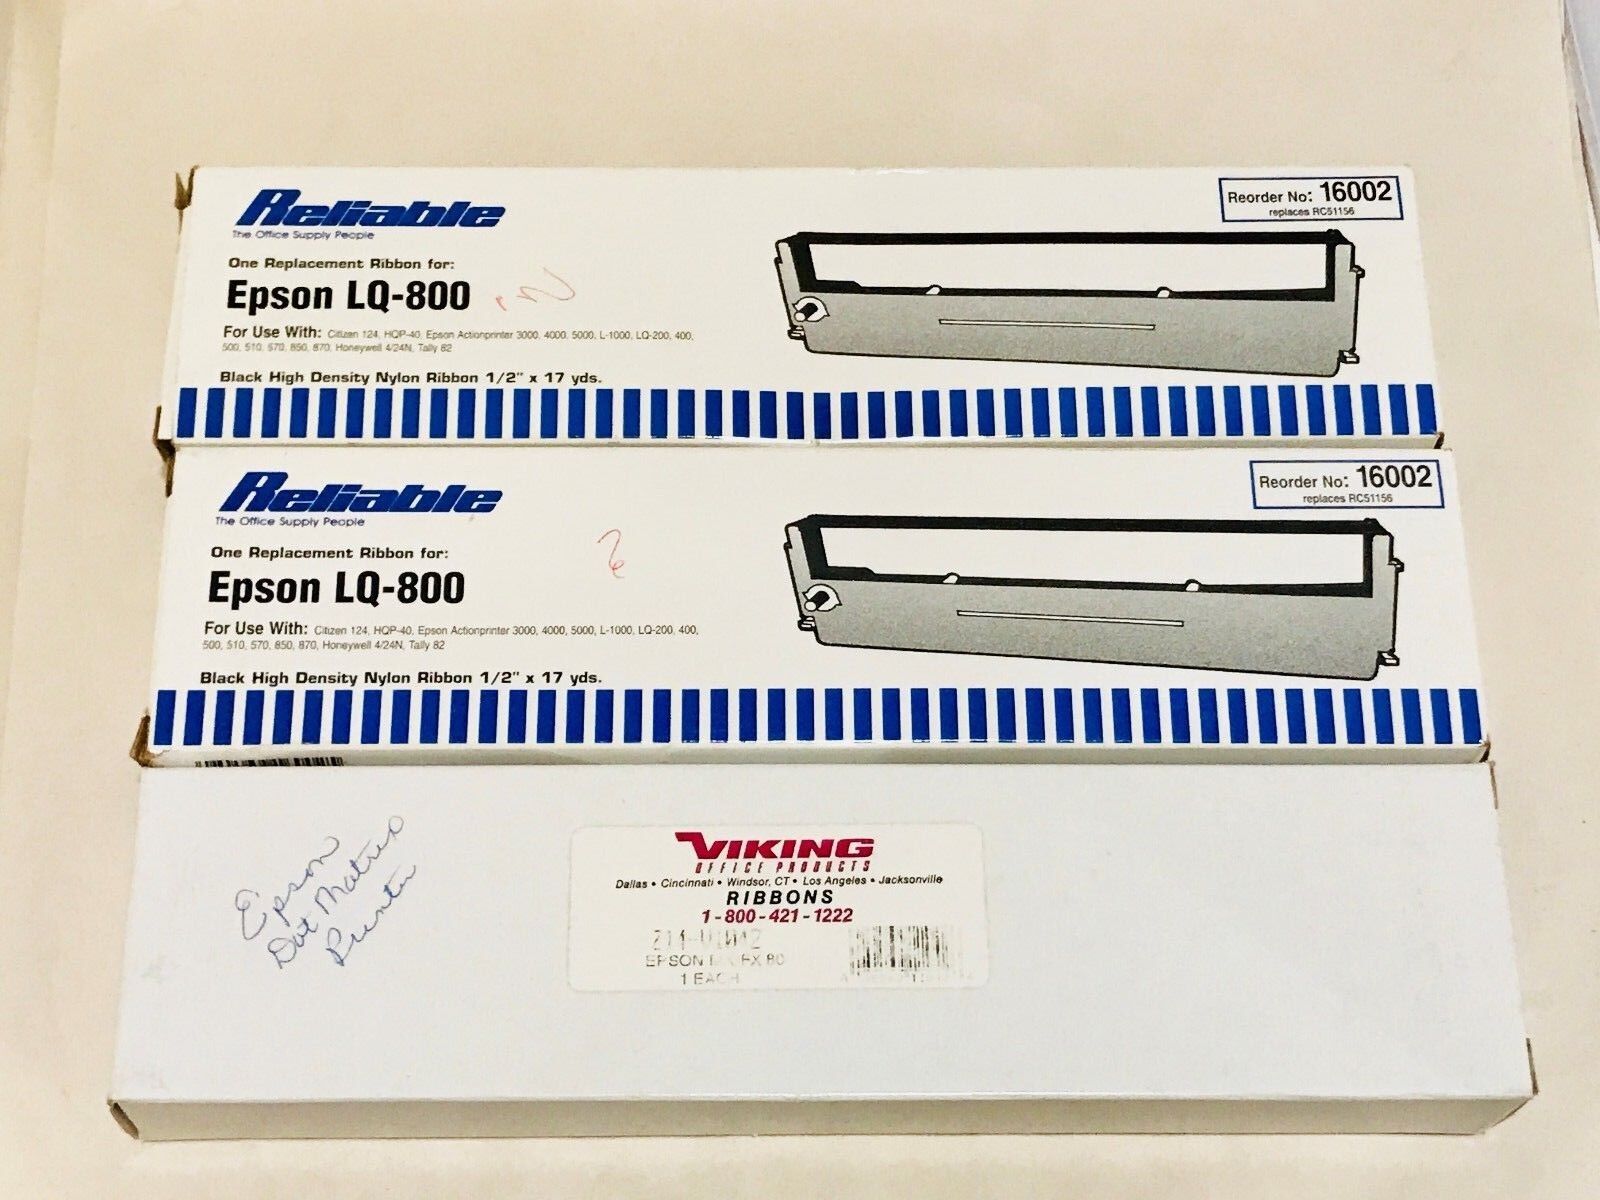 EPSON MX/FX 80 and EPSON LQ-800 Replacement Ribbons (Lot of 3)